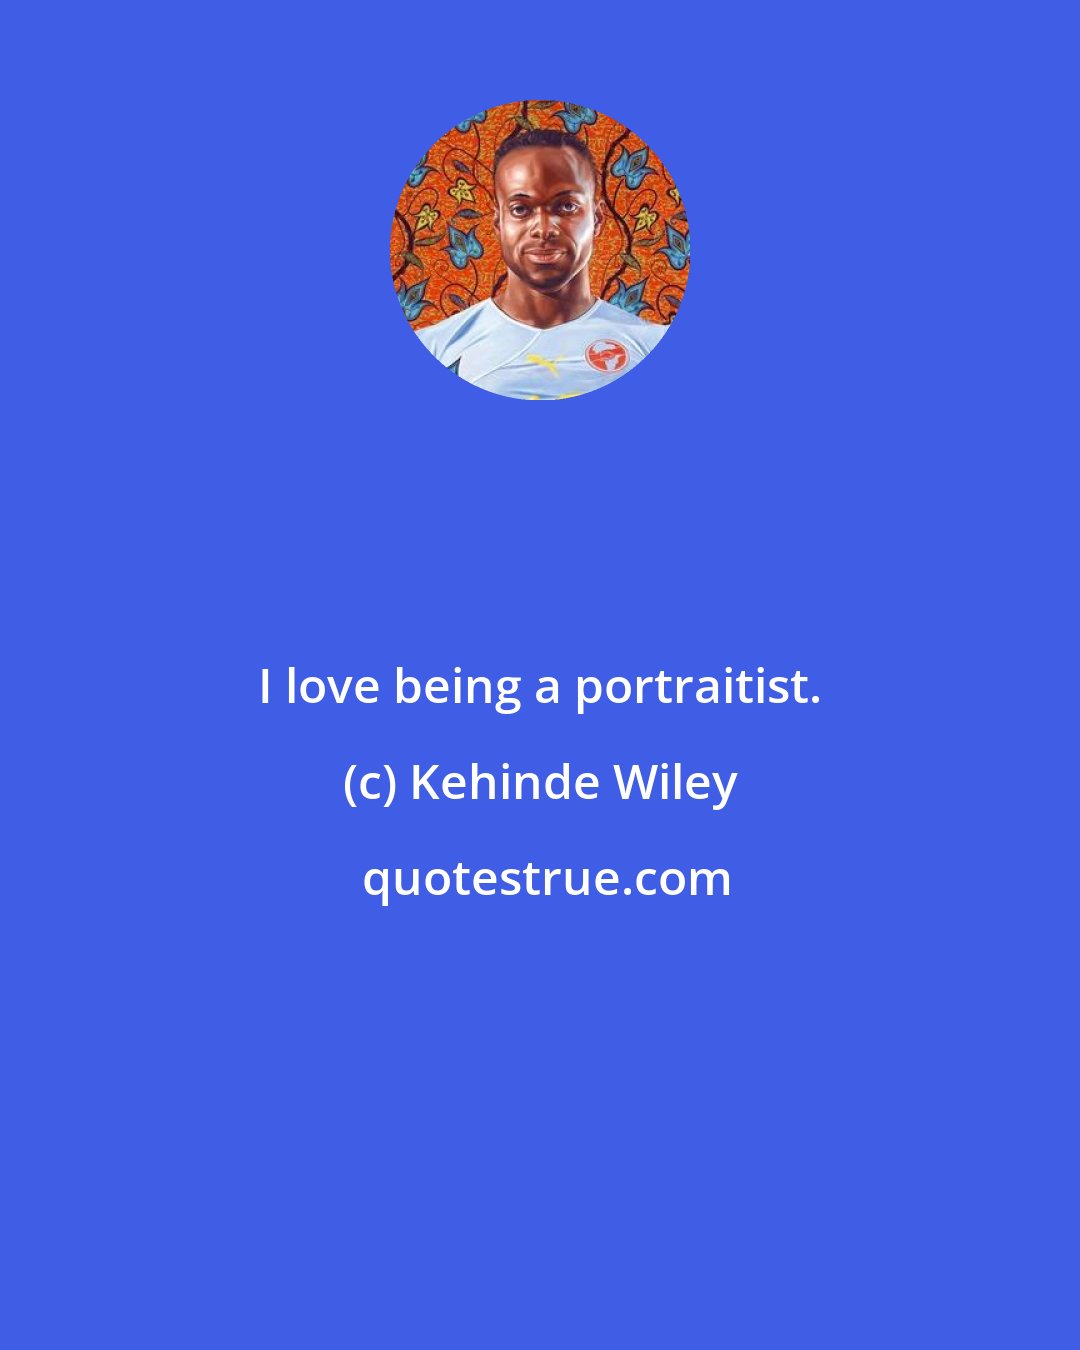 Kehinde Wiley: I love being a portraitist.